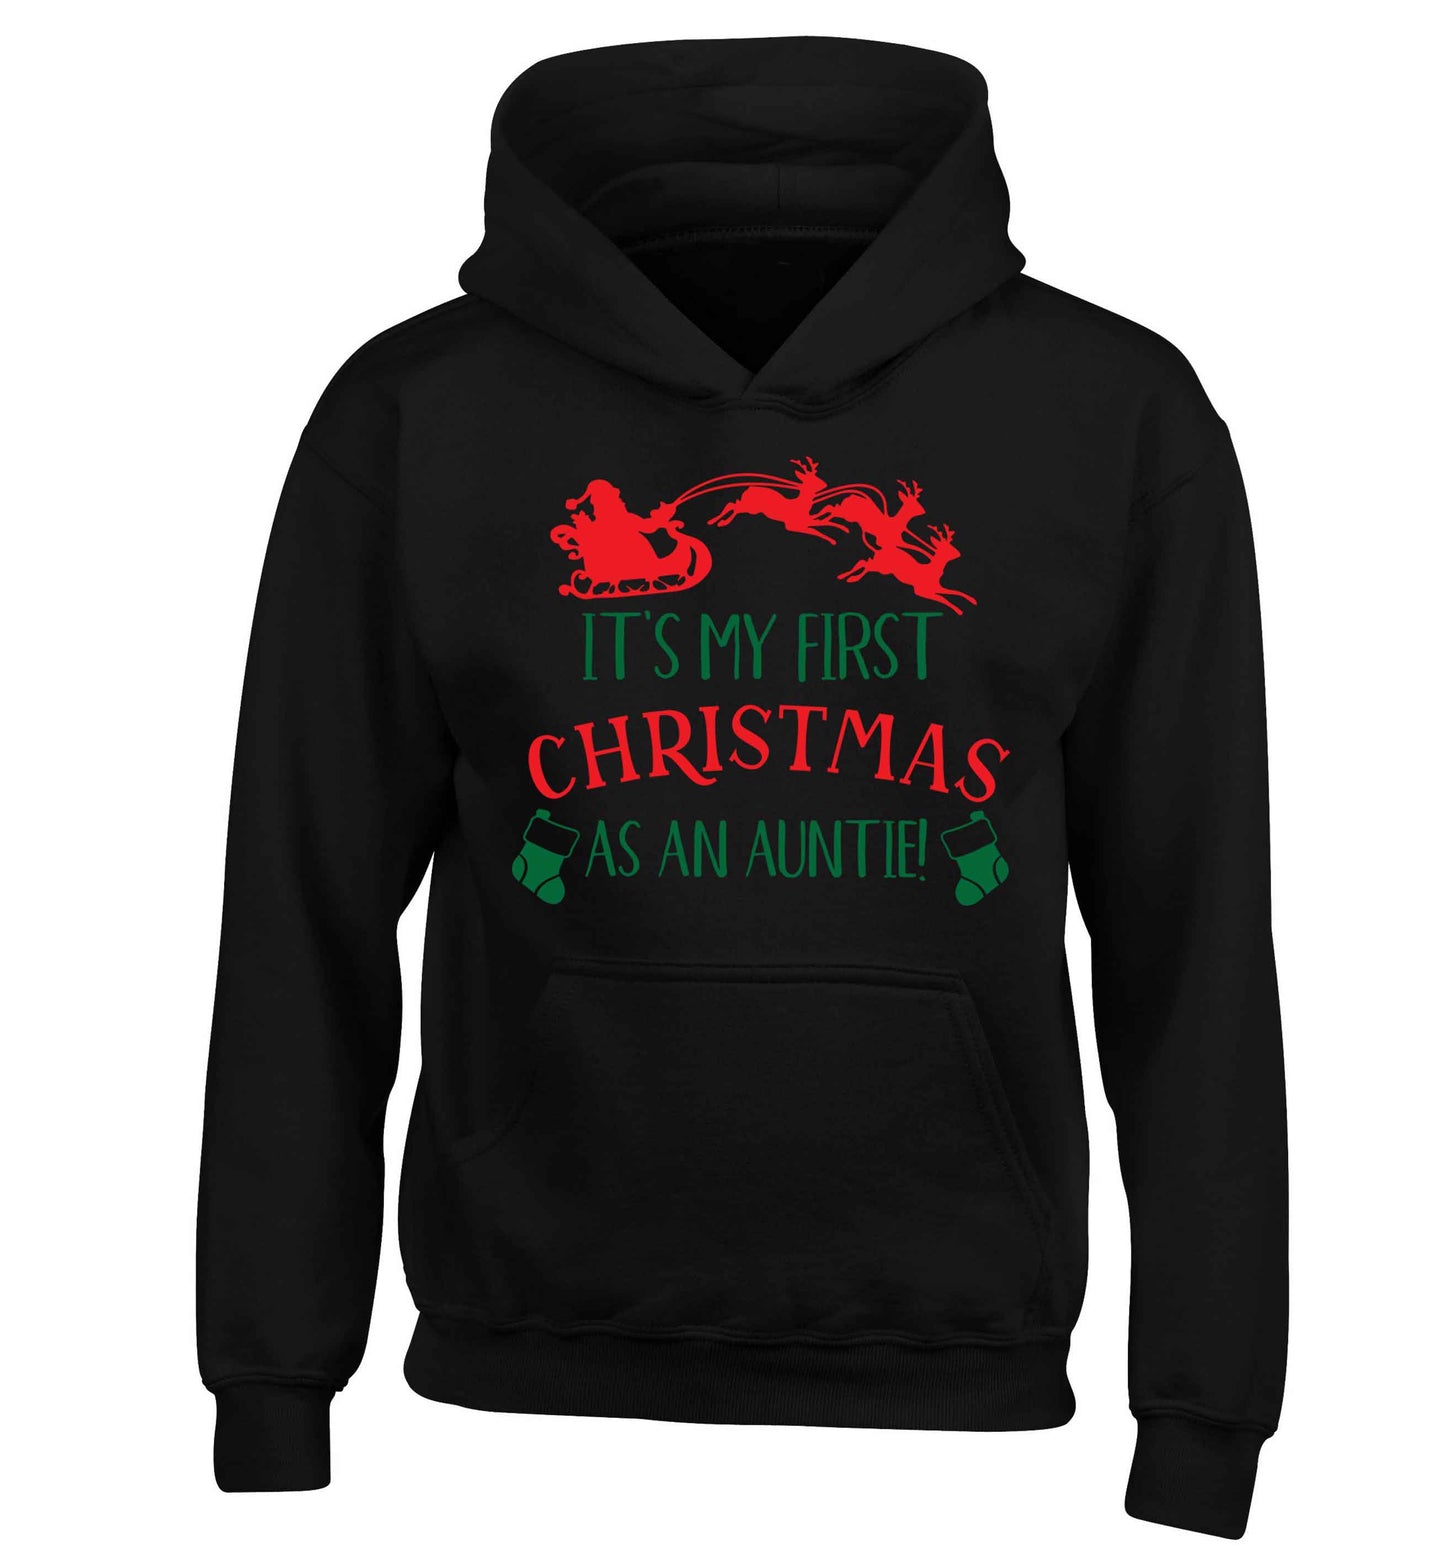 It's my first Christmas as an auntie! children's black hoodie 12-13 Years